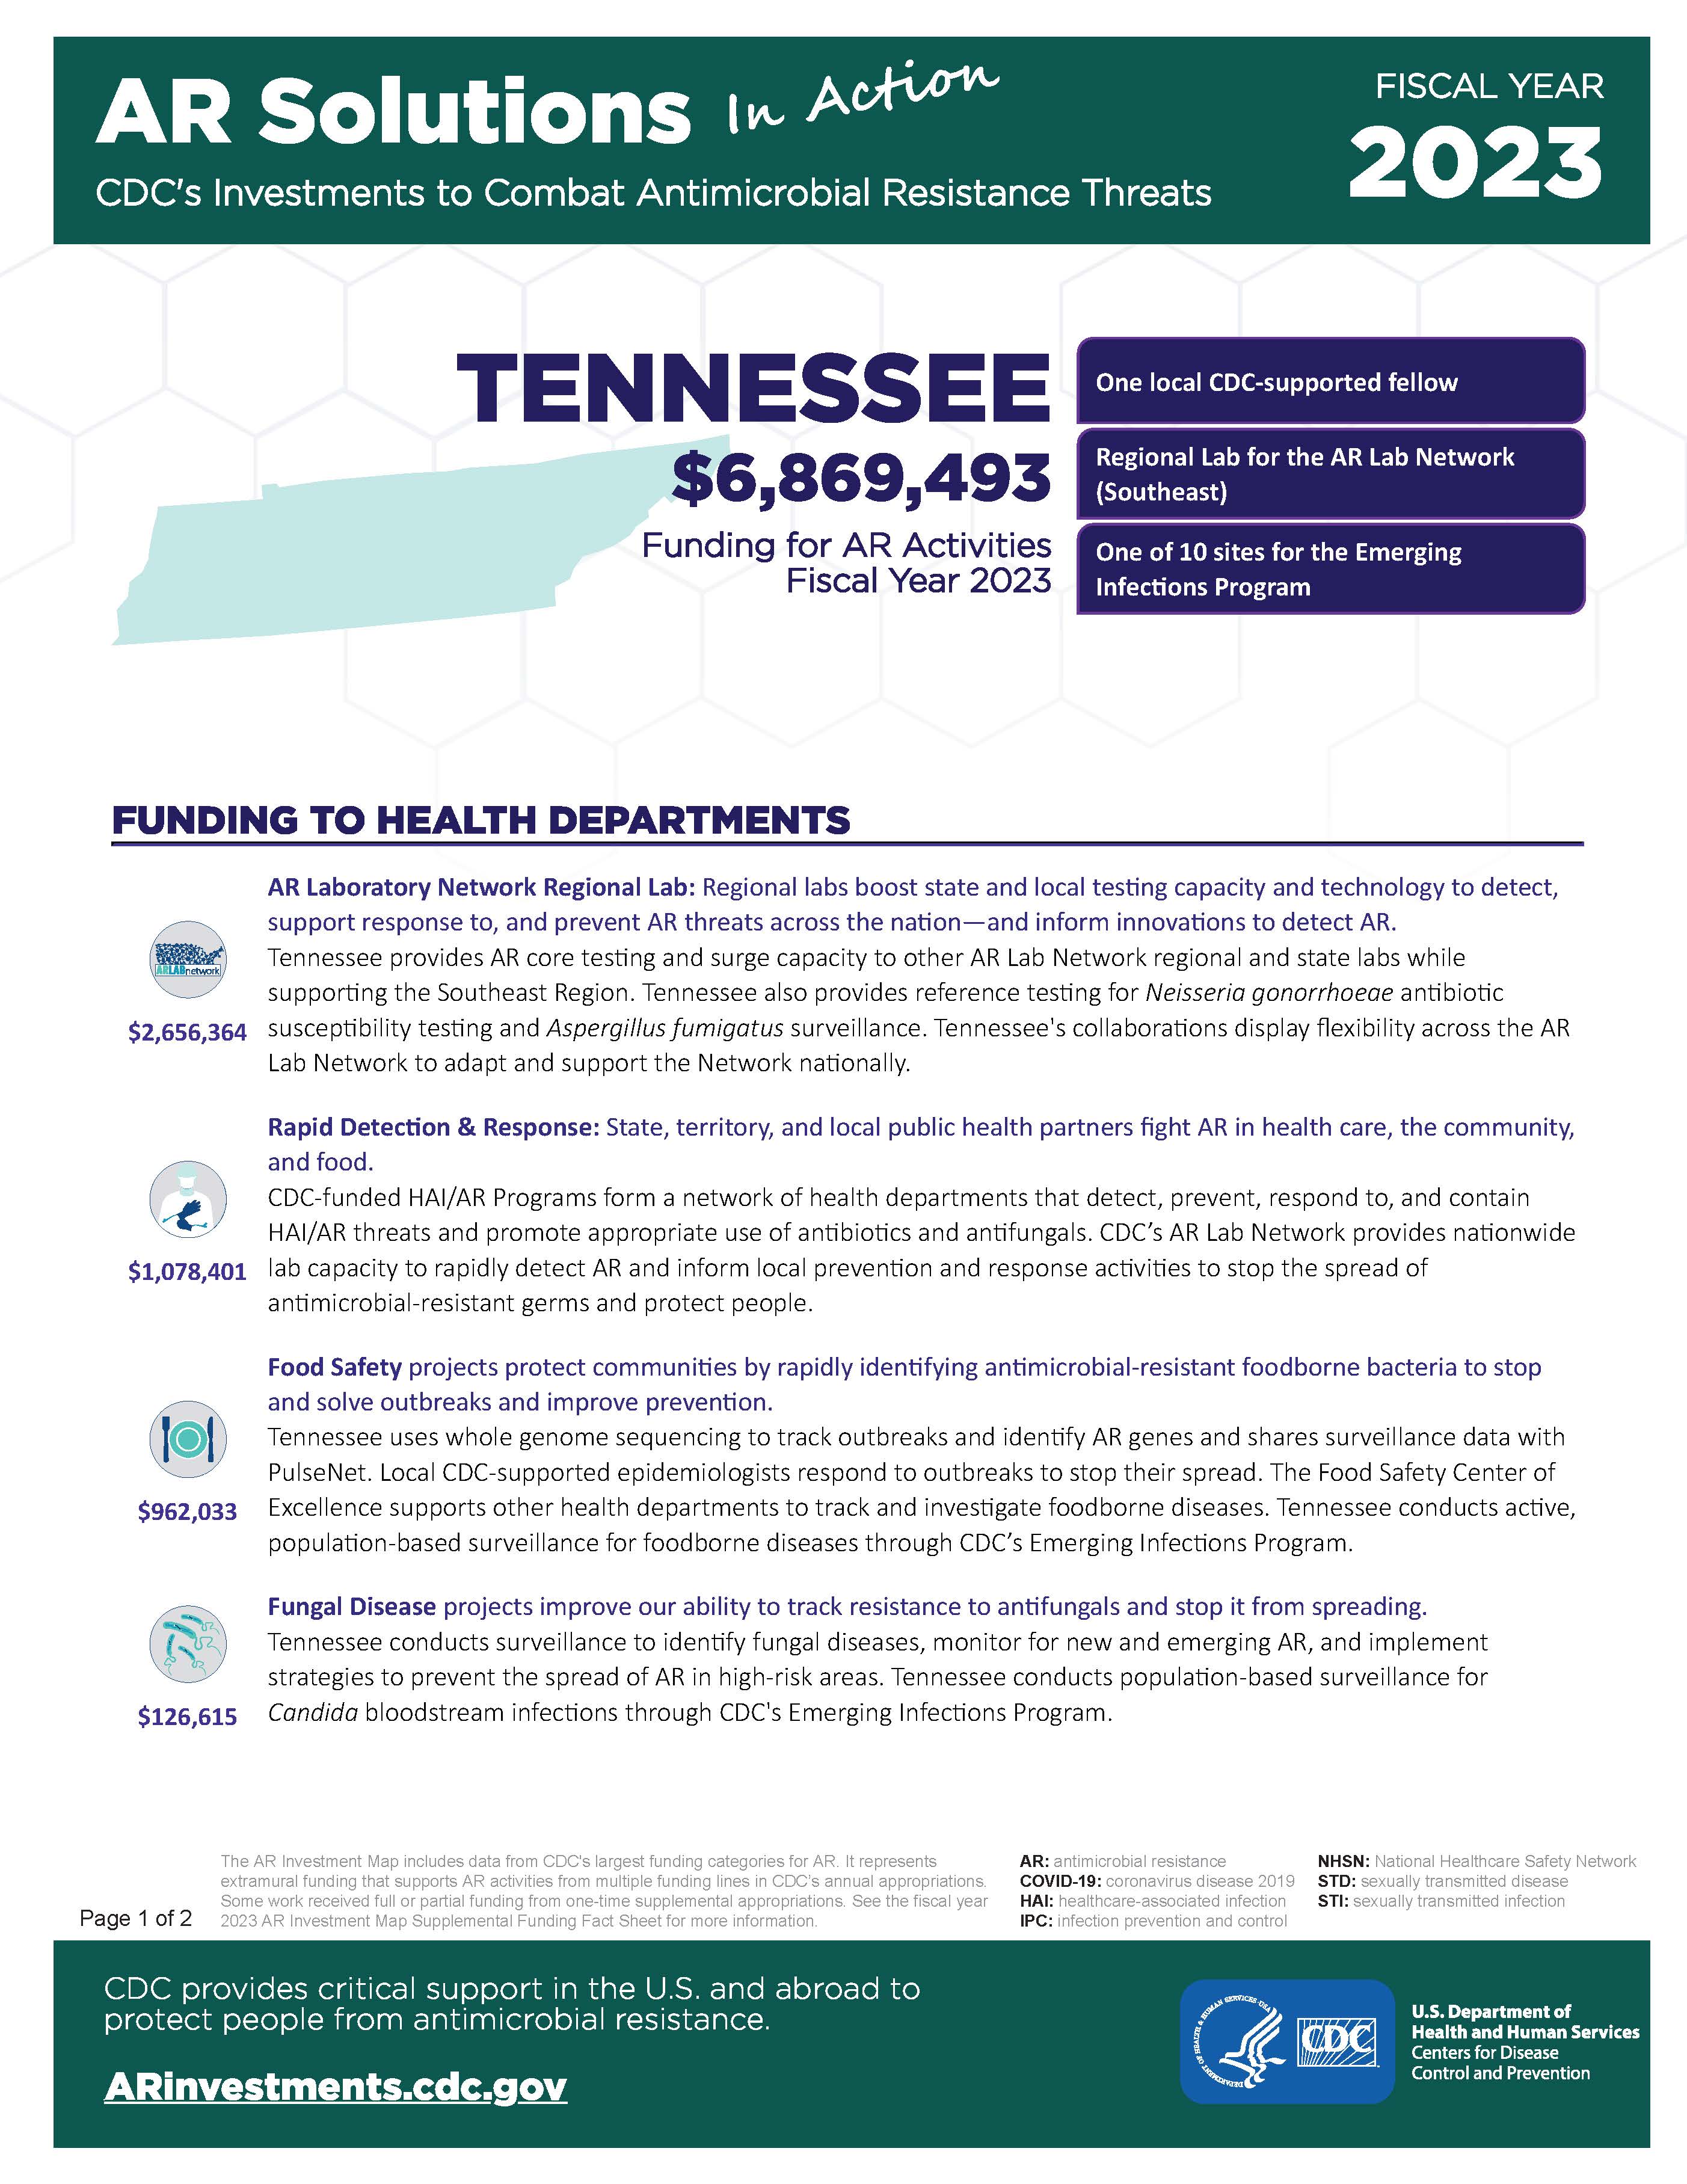 View Factsheet for Tennessee